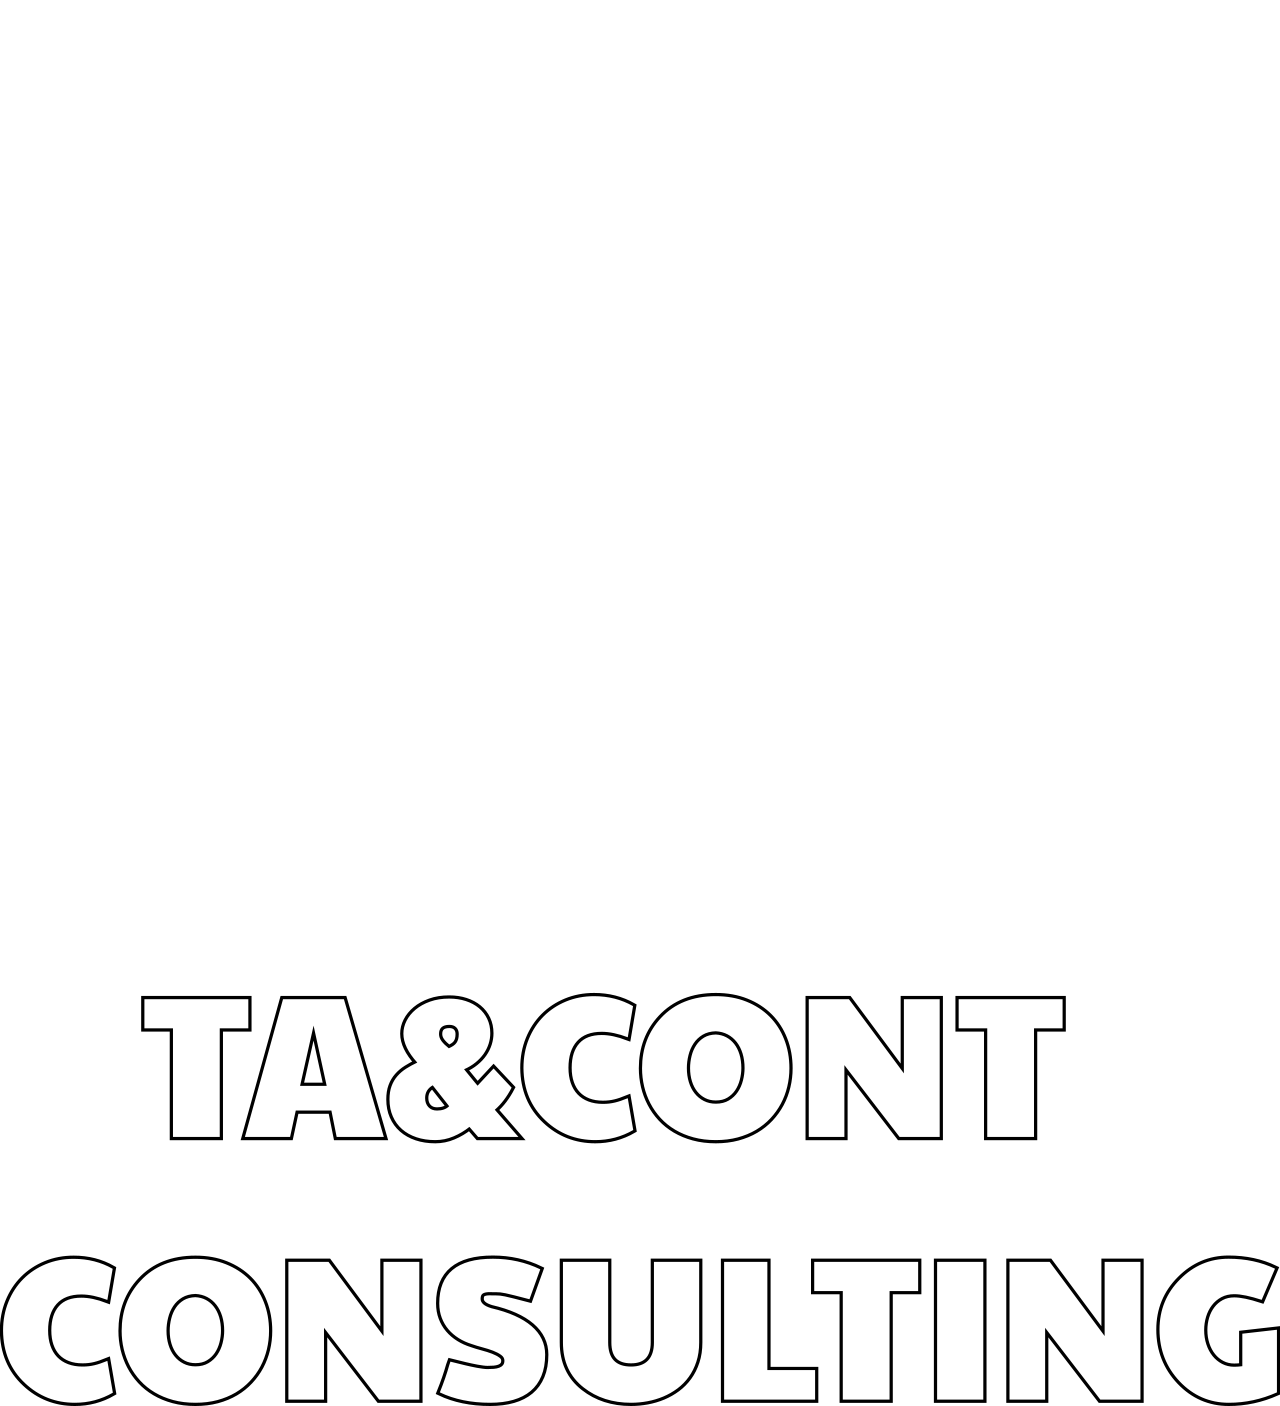 TA&CONT CONSULTING's logo